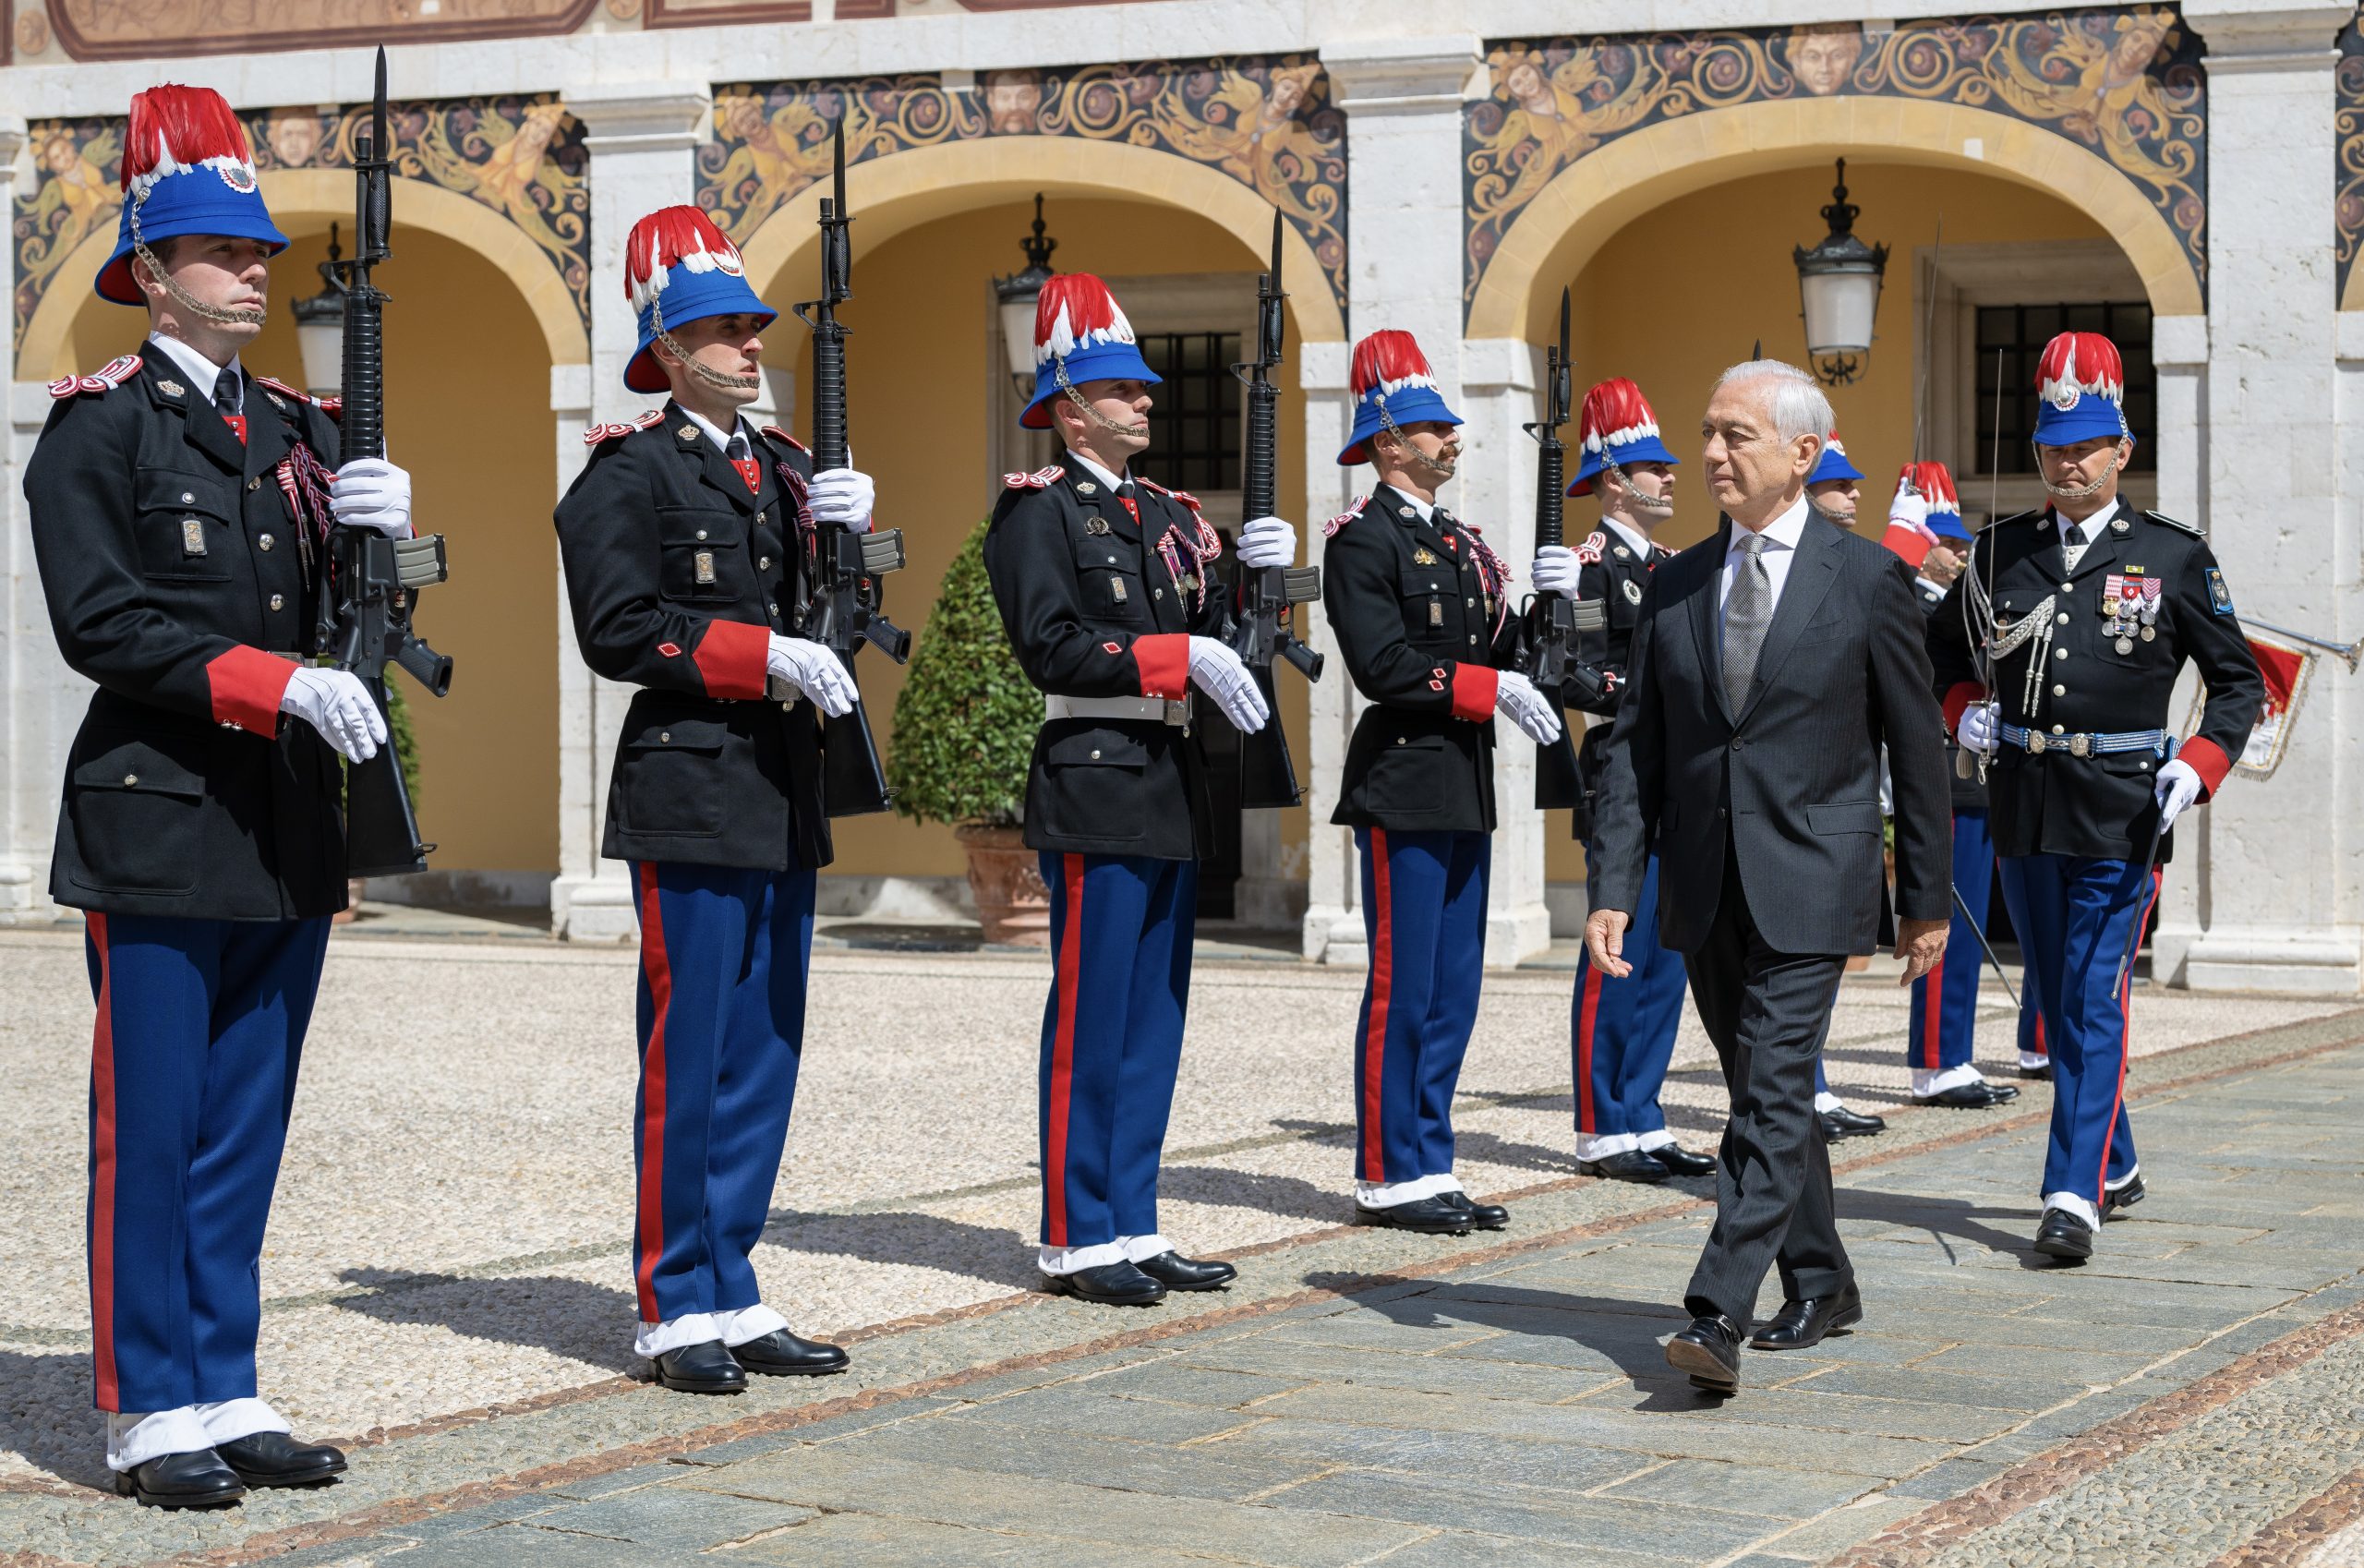 Presentation of the Letters of Credence to Prince Albert II of Monaco.